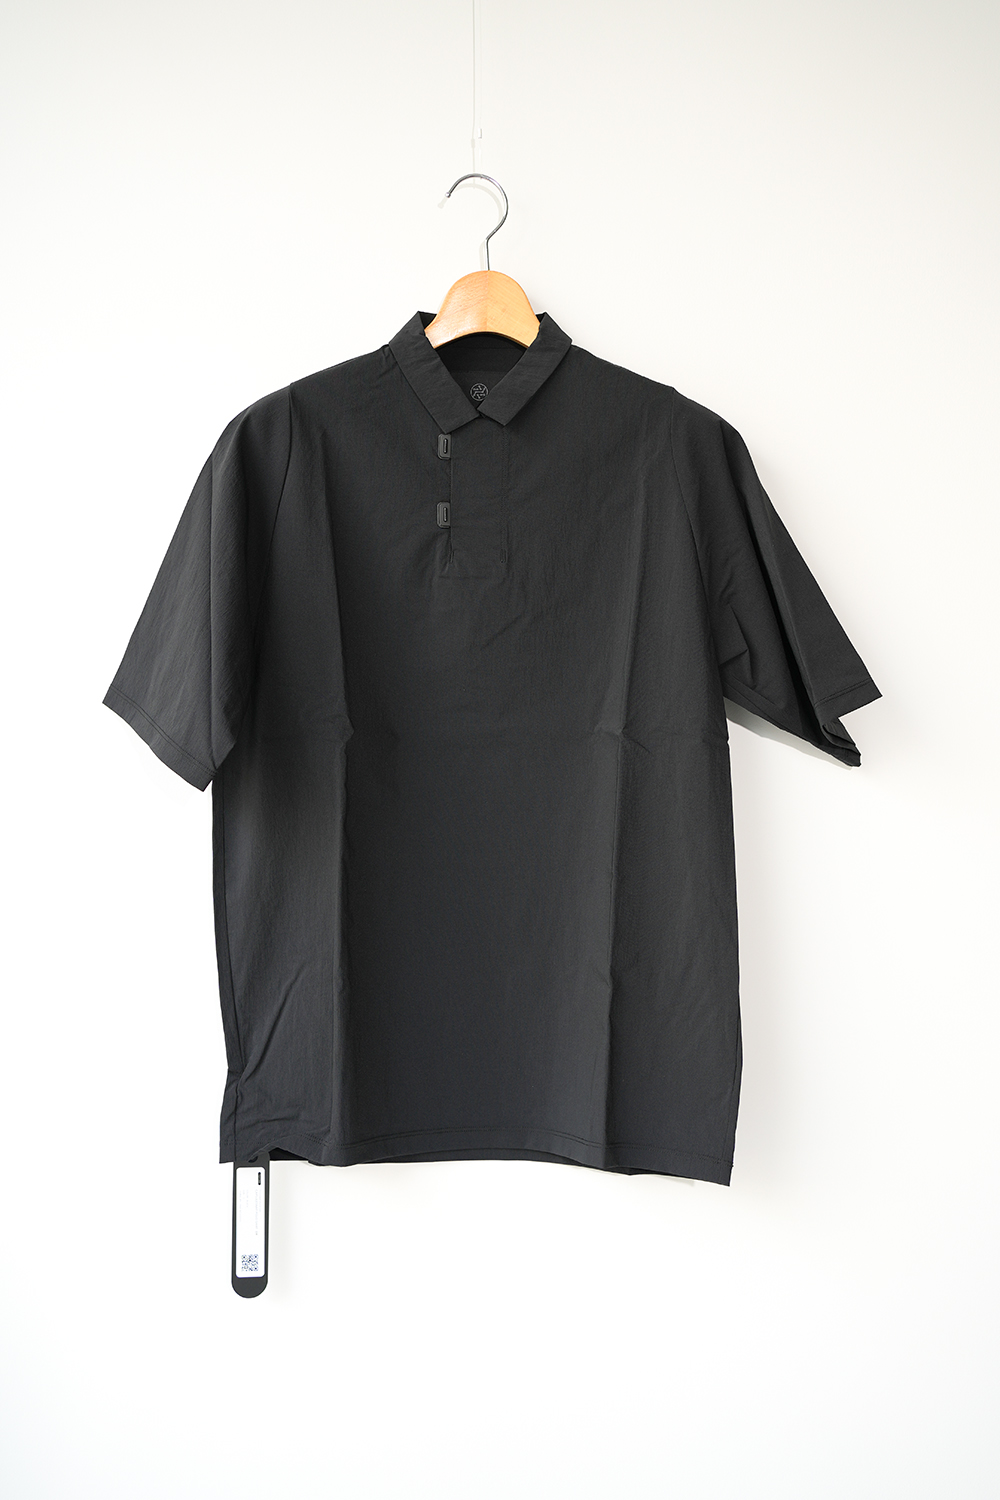 CAPSULESNAP POLO SHIRT DOCTOROID | ANOTHER LOUNGE